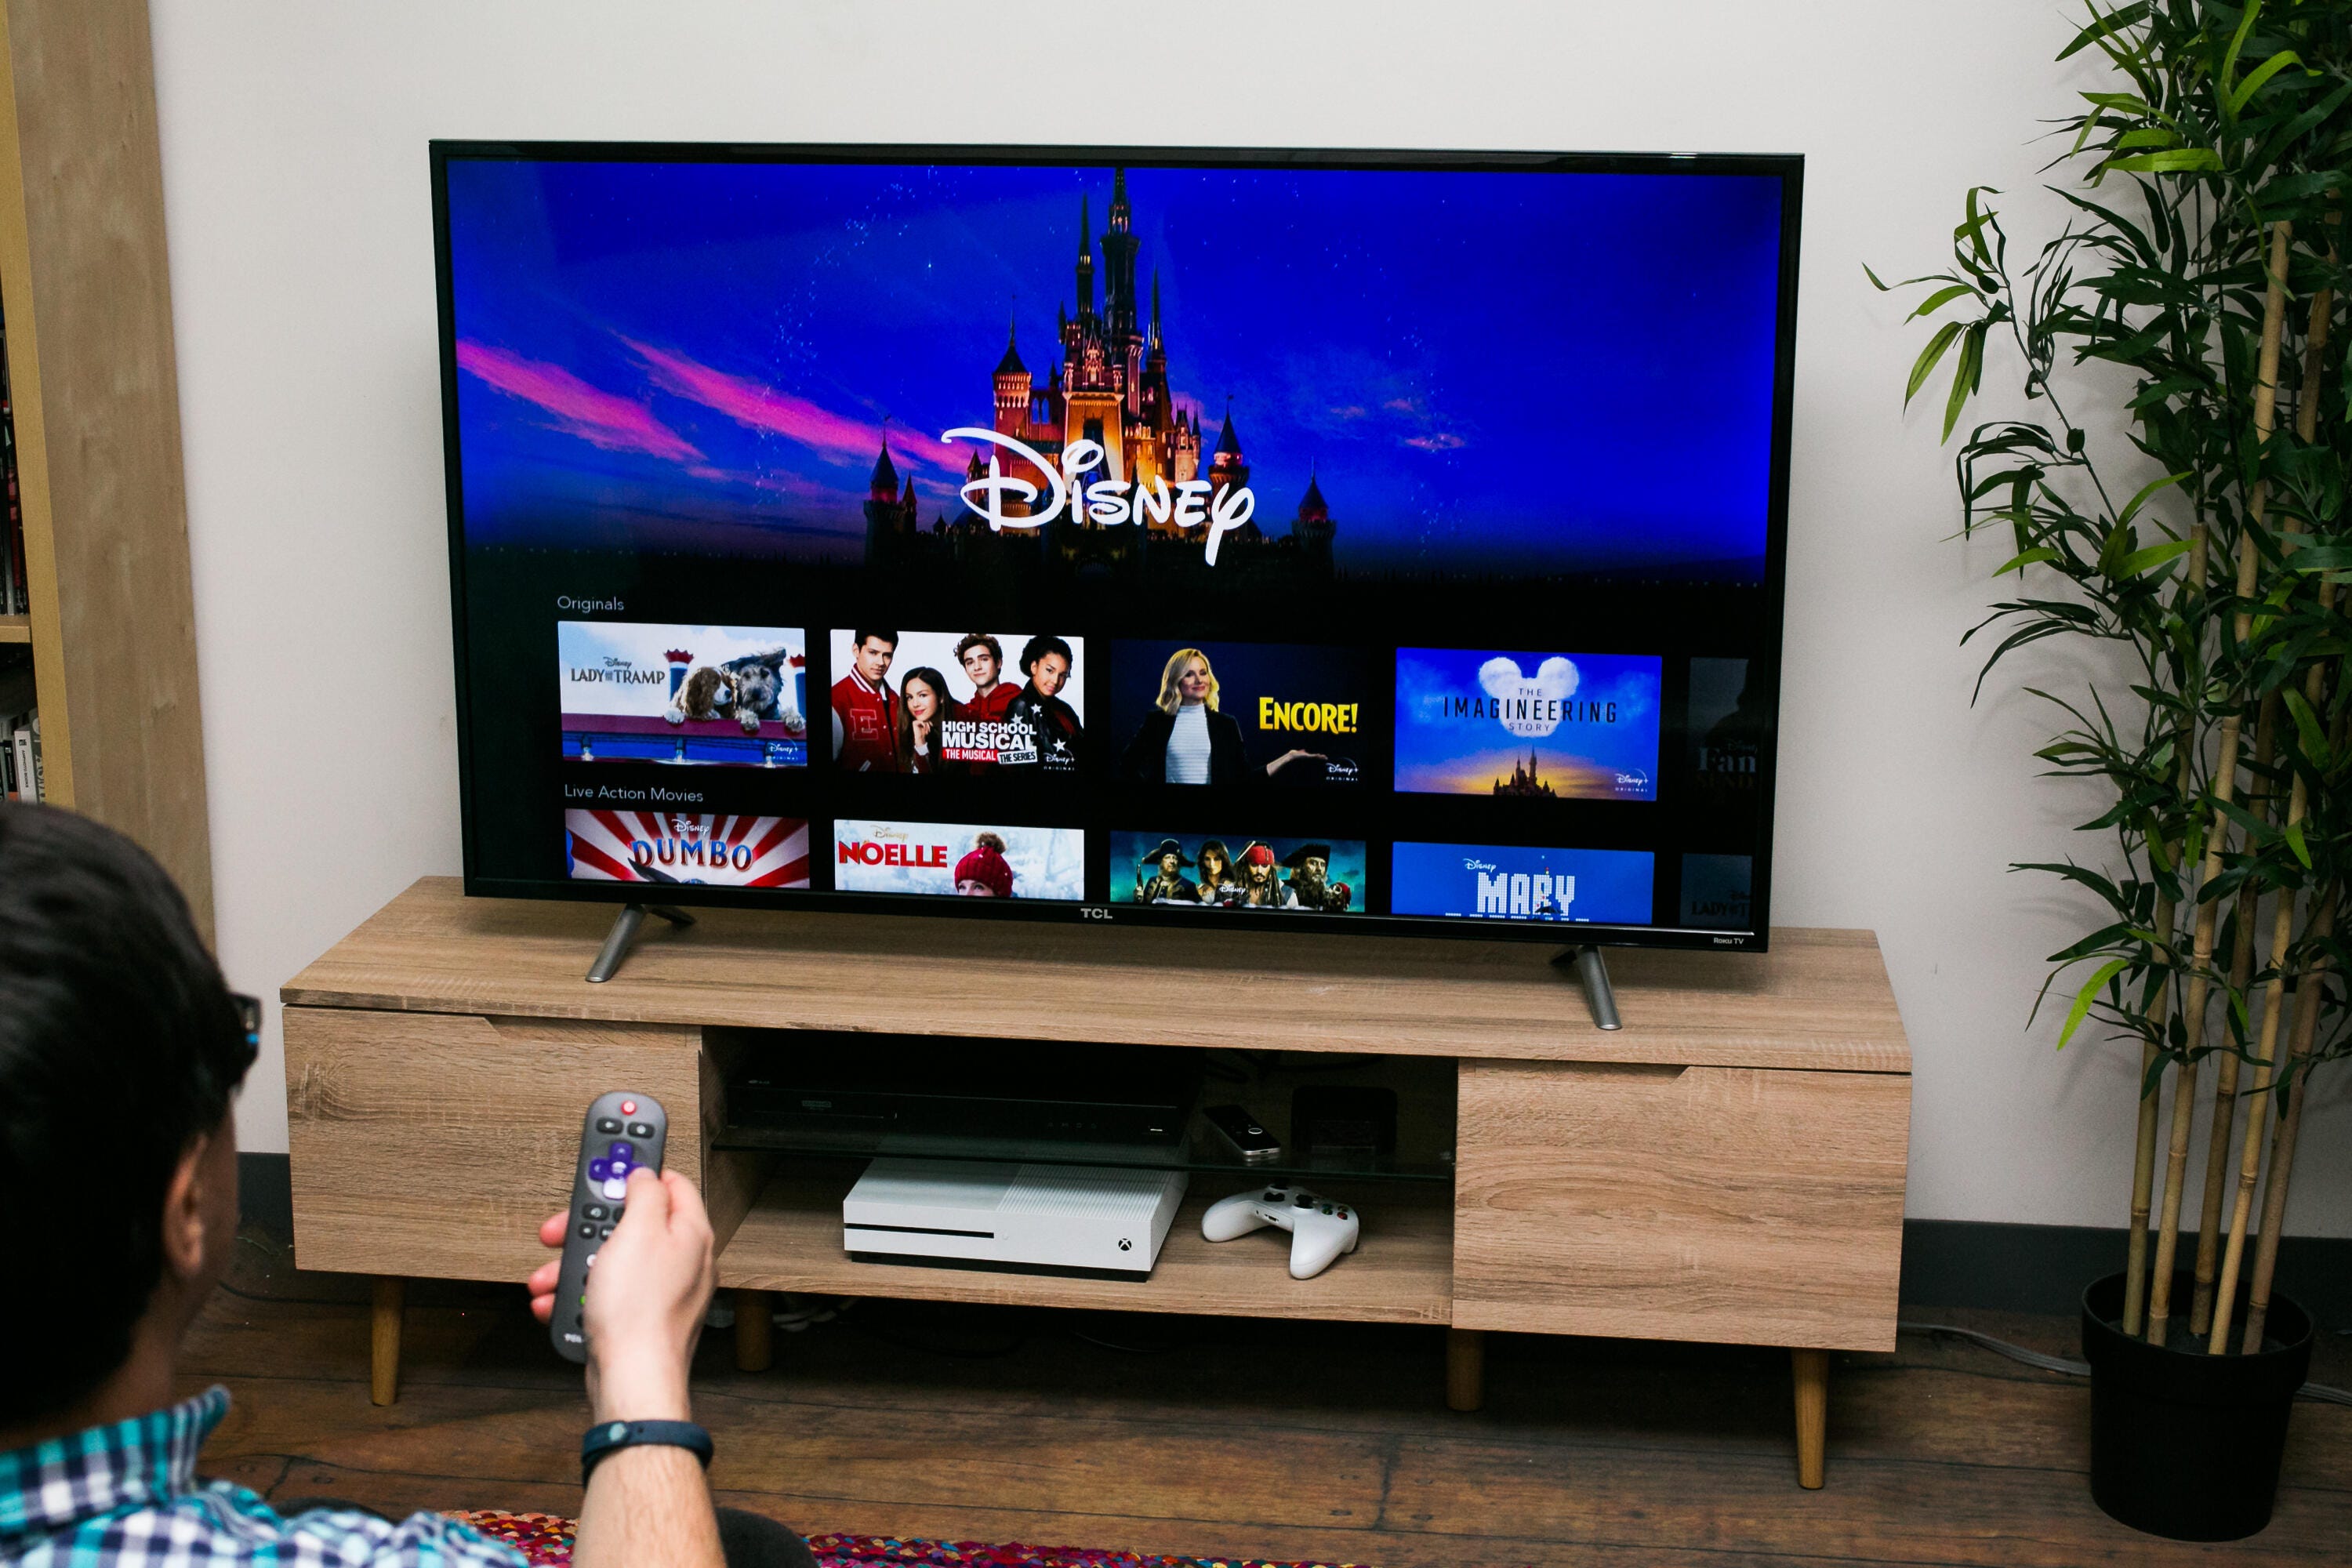 Disney Plus bundle deal: How to add your Hulu and ESPN Plus accounts